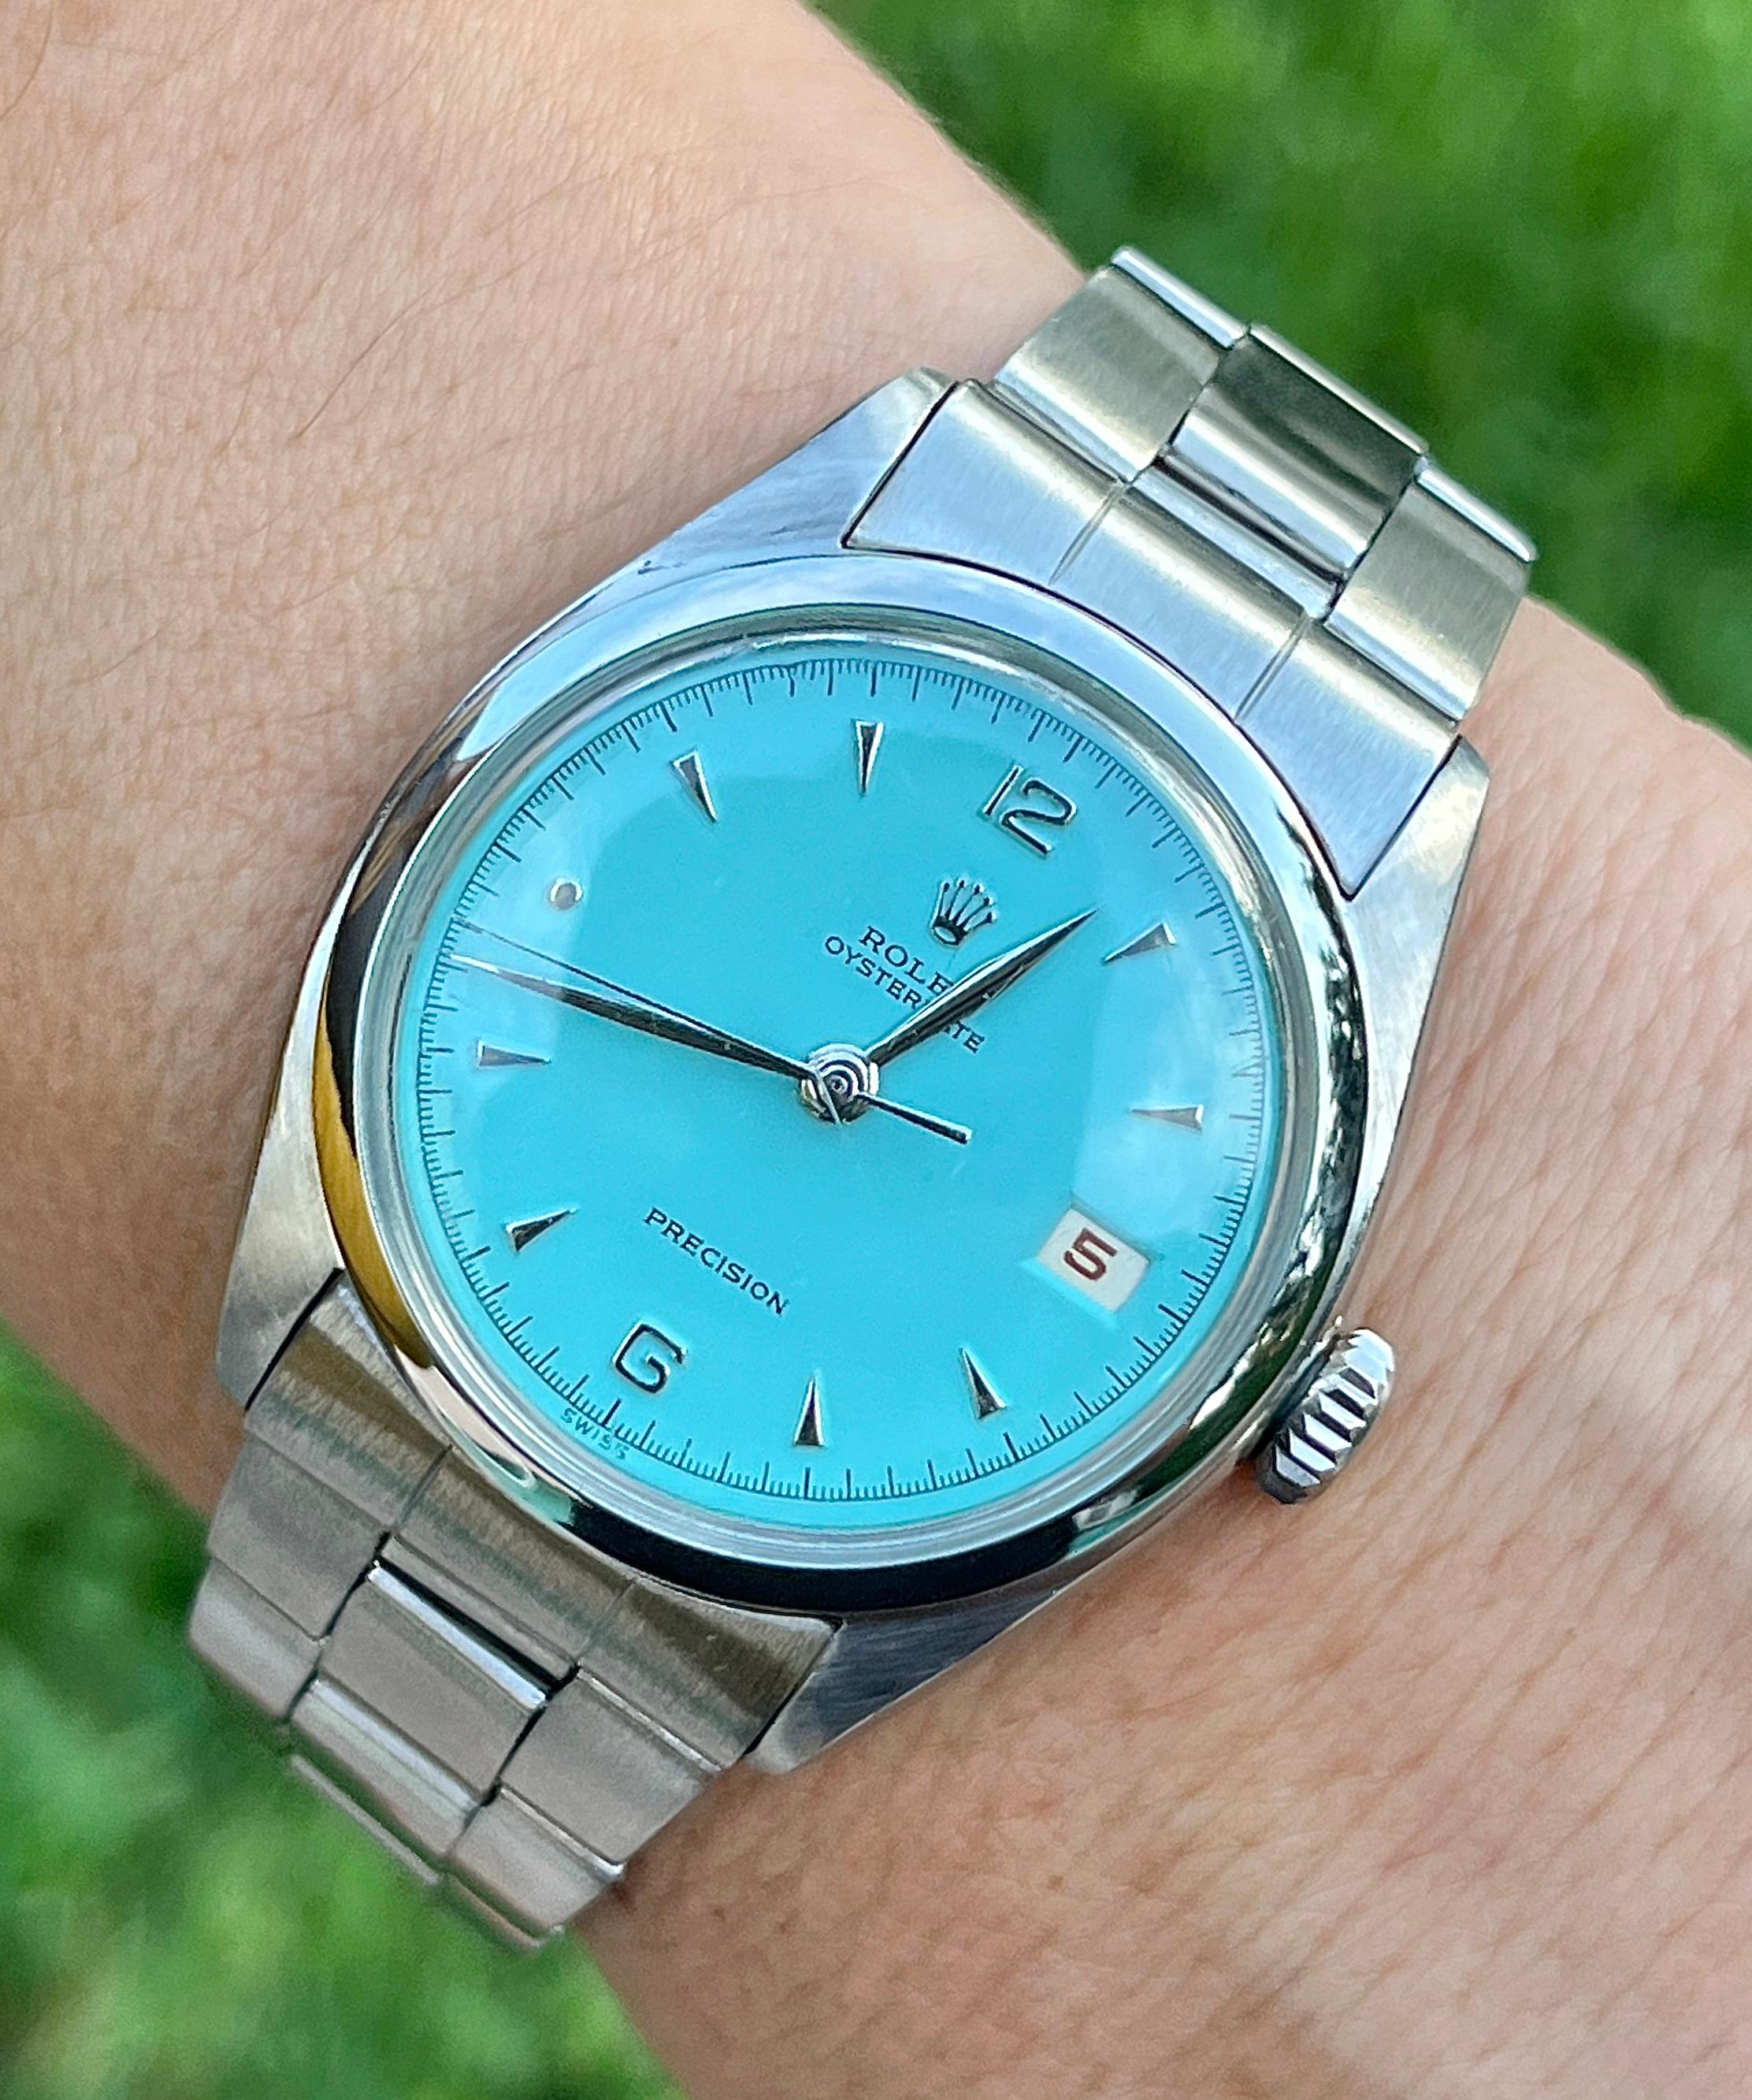 Rolex Oysterdate Tiffany Blue dial vintage wrist watch in stainless steel. Circa 1963. Featuring a well-kept oyster bracelet, fold-over clasp (deployment release), screw-down crown, and 17 jewels. Also featuring pinched hands and hour markers with a